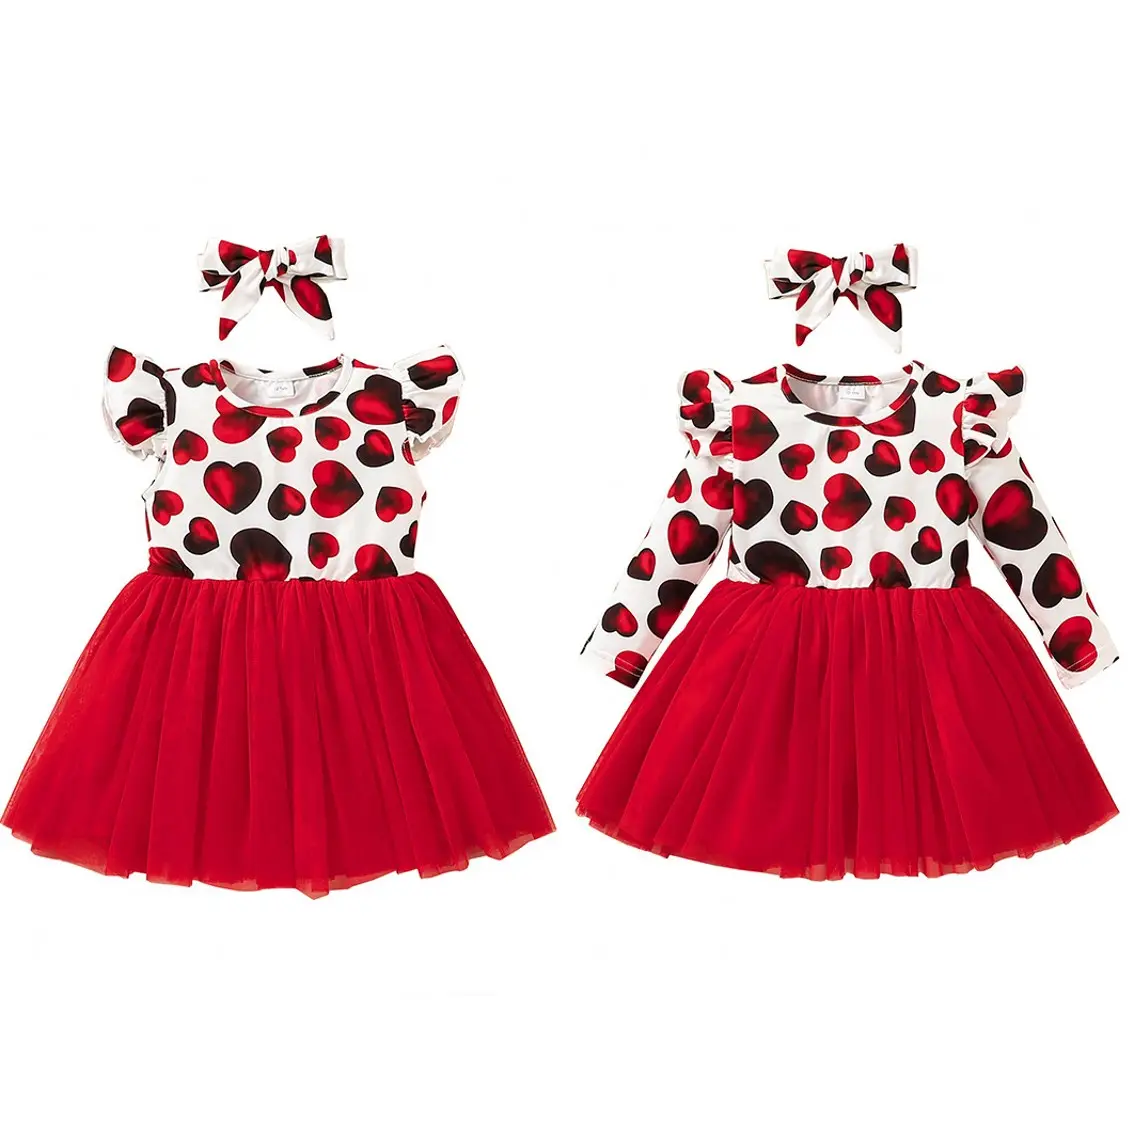 Baby Dresses Tutu Dress Kids Dresses For Girls Children Valentines Day Baby Clothes